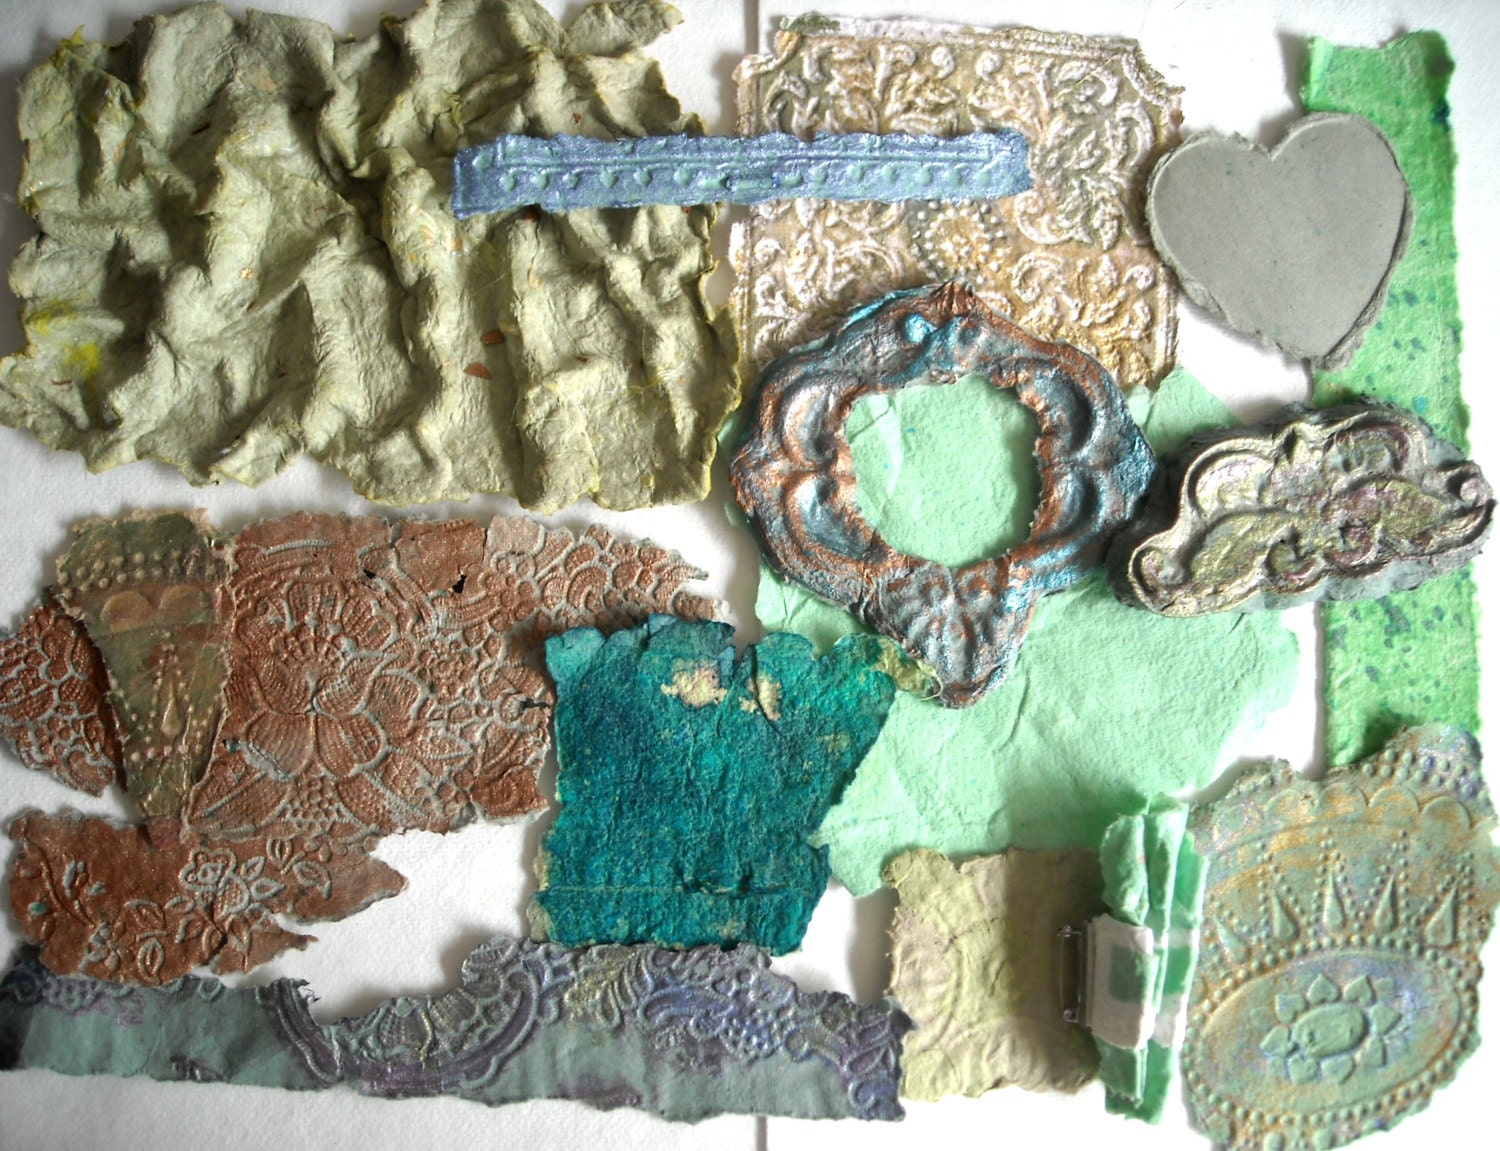 Decorative Paper, Mixed Media Collage Art, Collage Supplies, Green, Copper, Textured Paper, Handmade Paper, Mixed Media Supplies, Cast Paper - ThresholdPaperArt